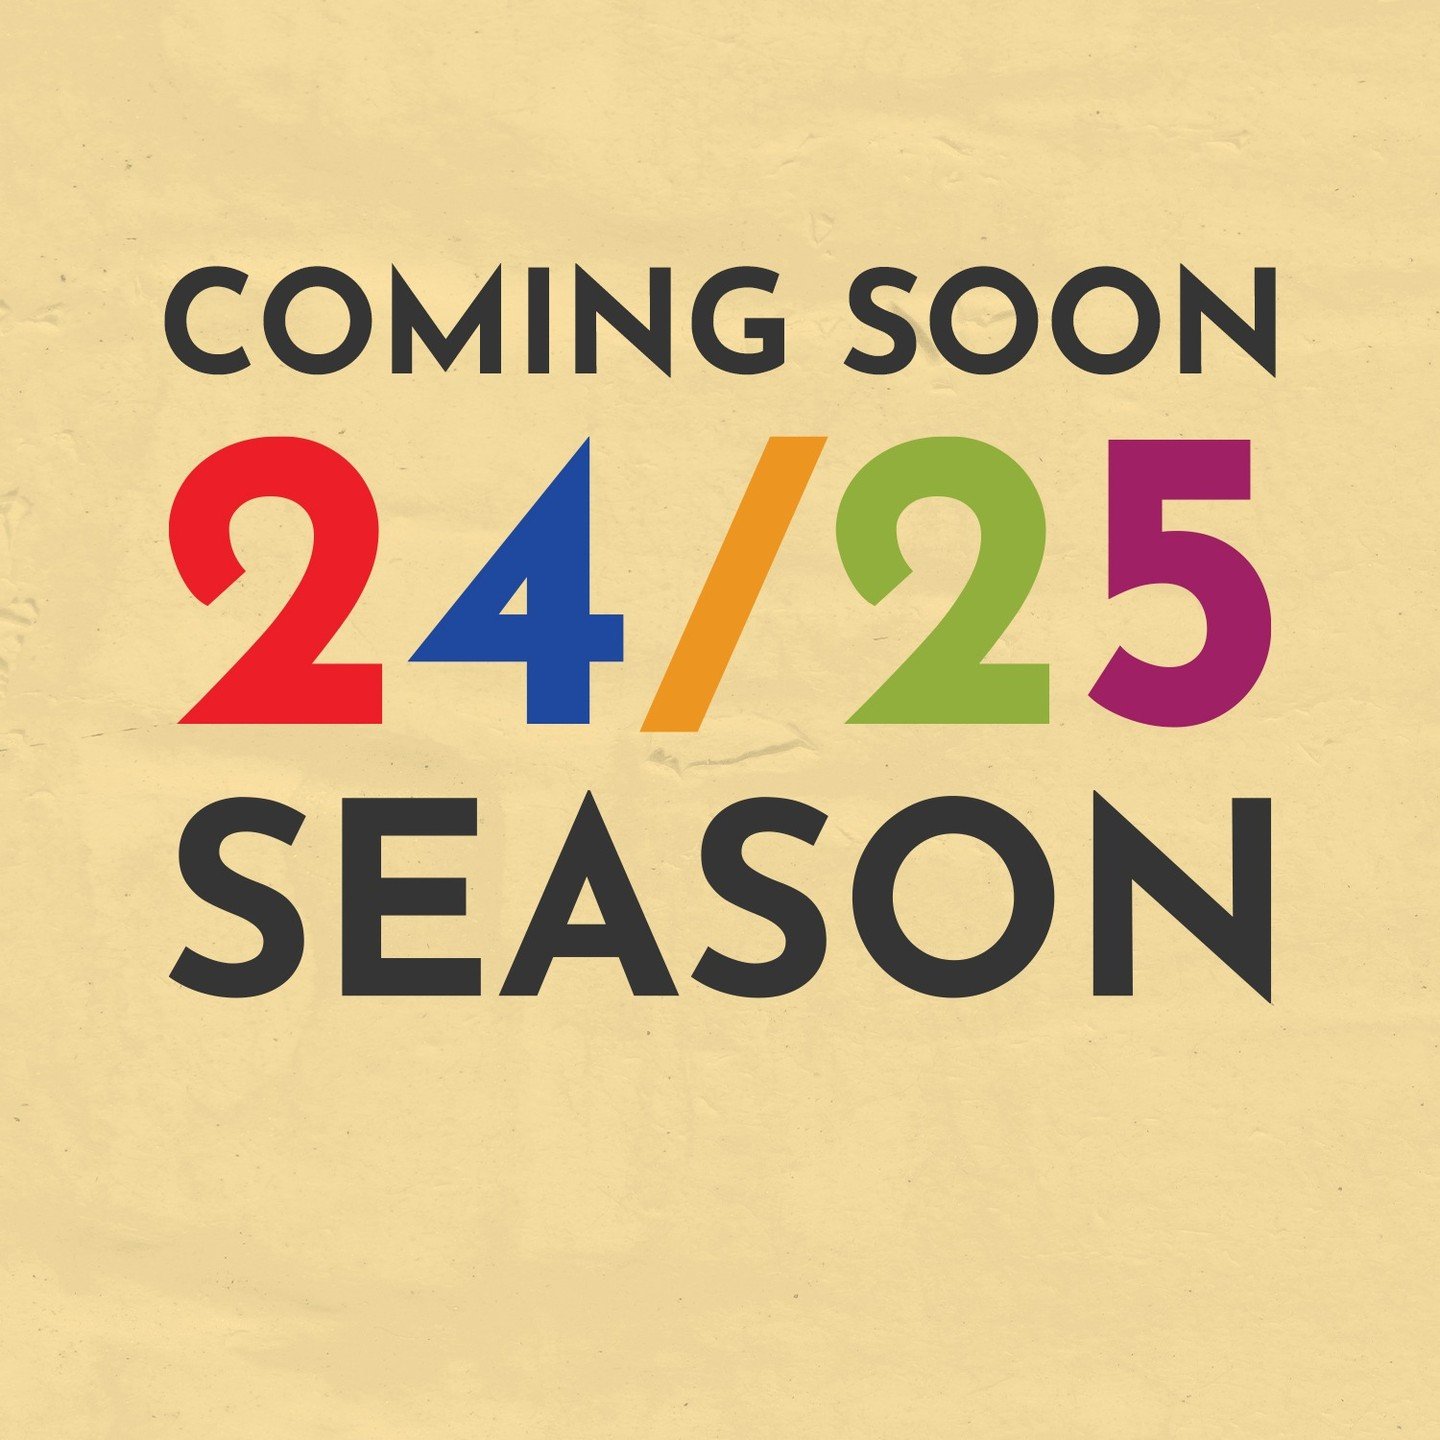 Season 27 is coming soon!

Subscriptions for our 24/25 season go on sale next week! Stay tuned for the announcement of next year's lineup, and be among the first to subscribe to our boldest season yet.